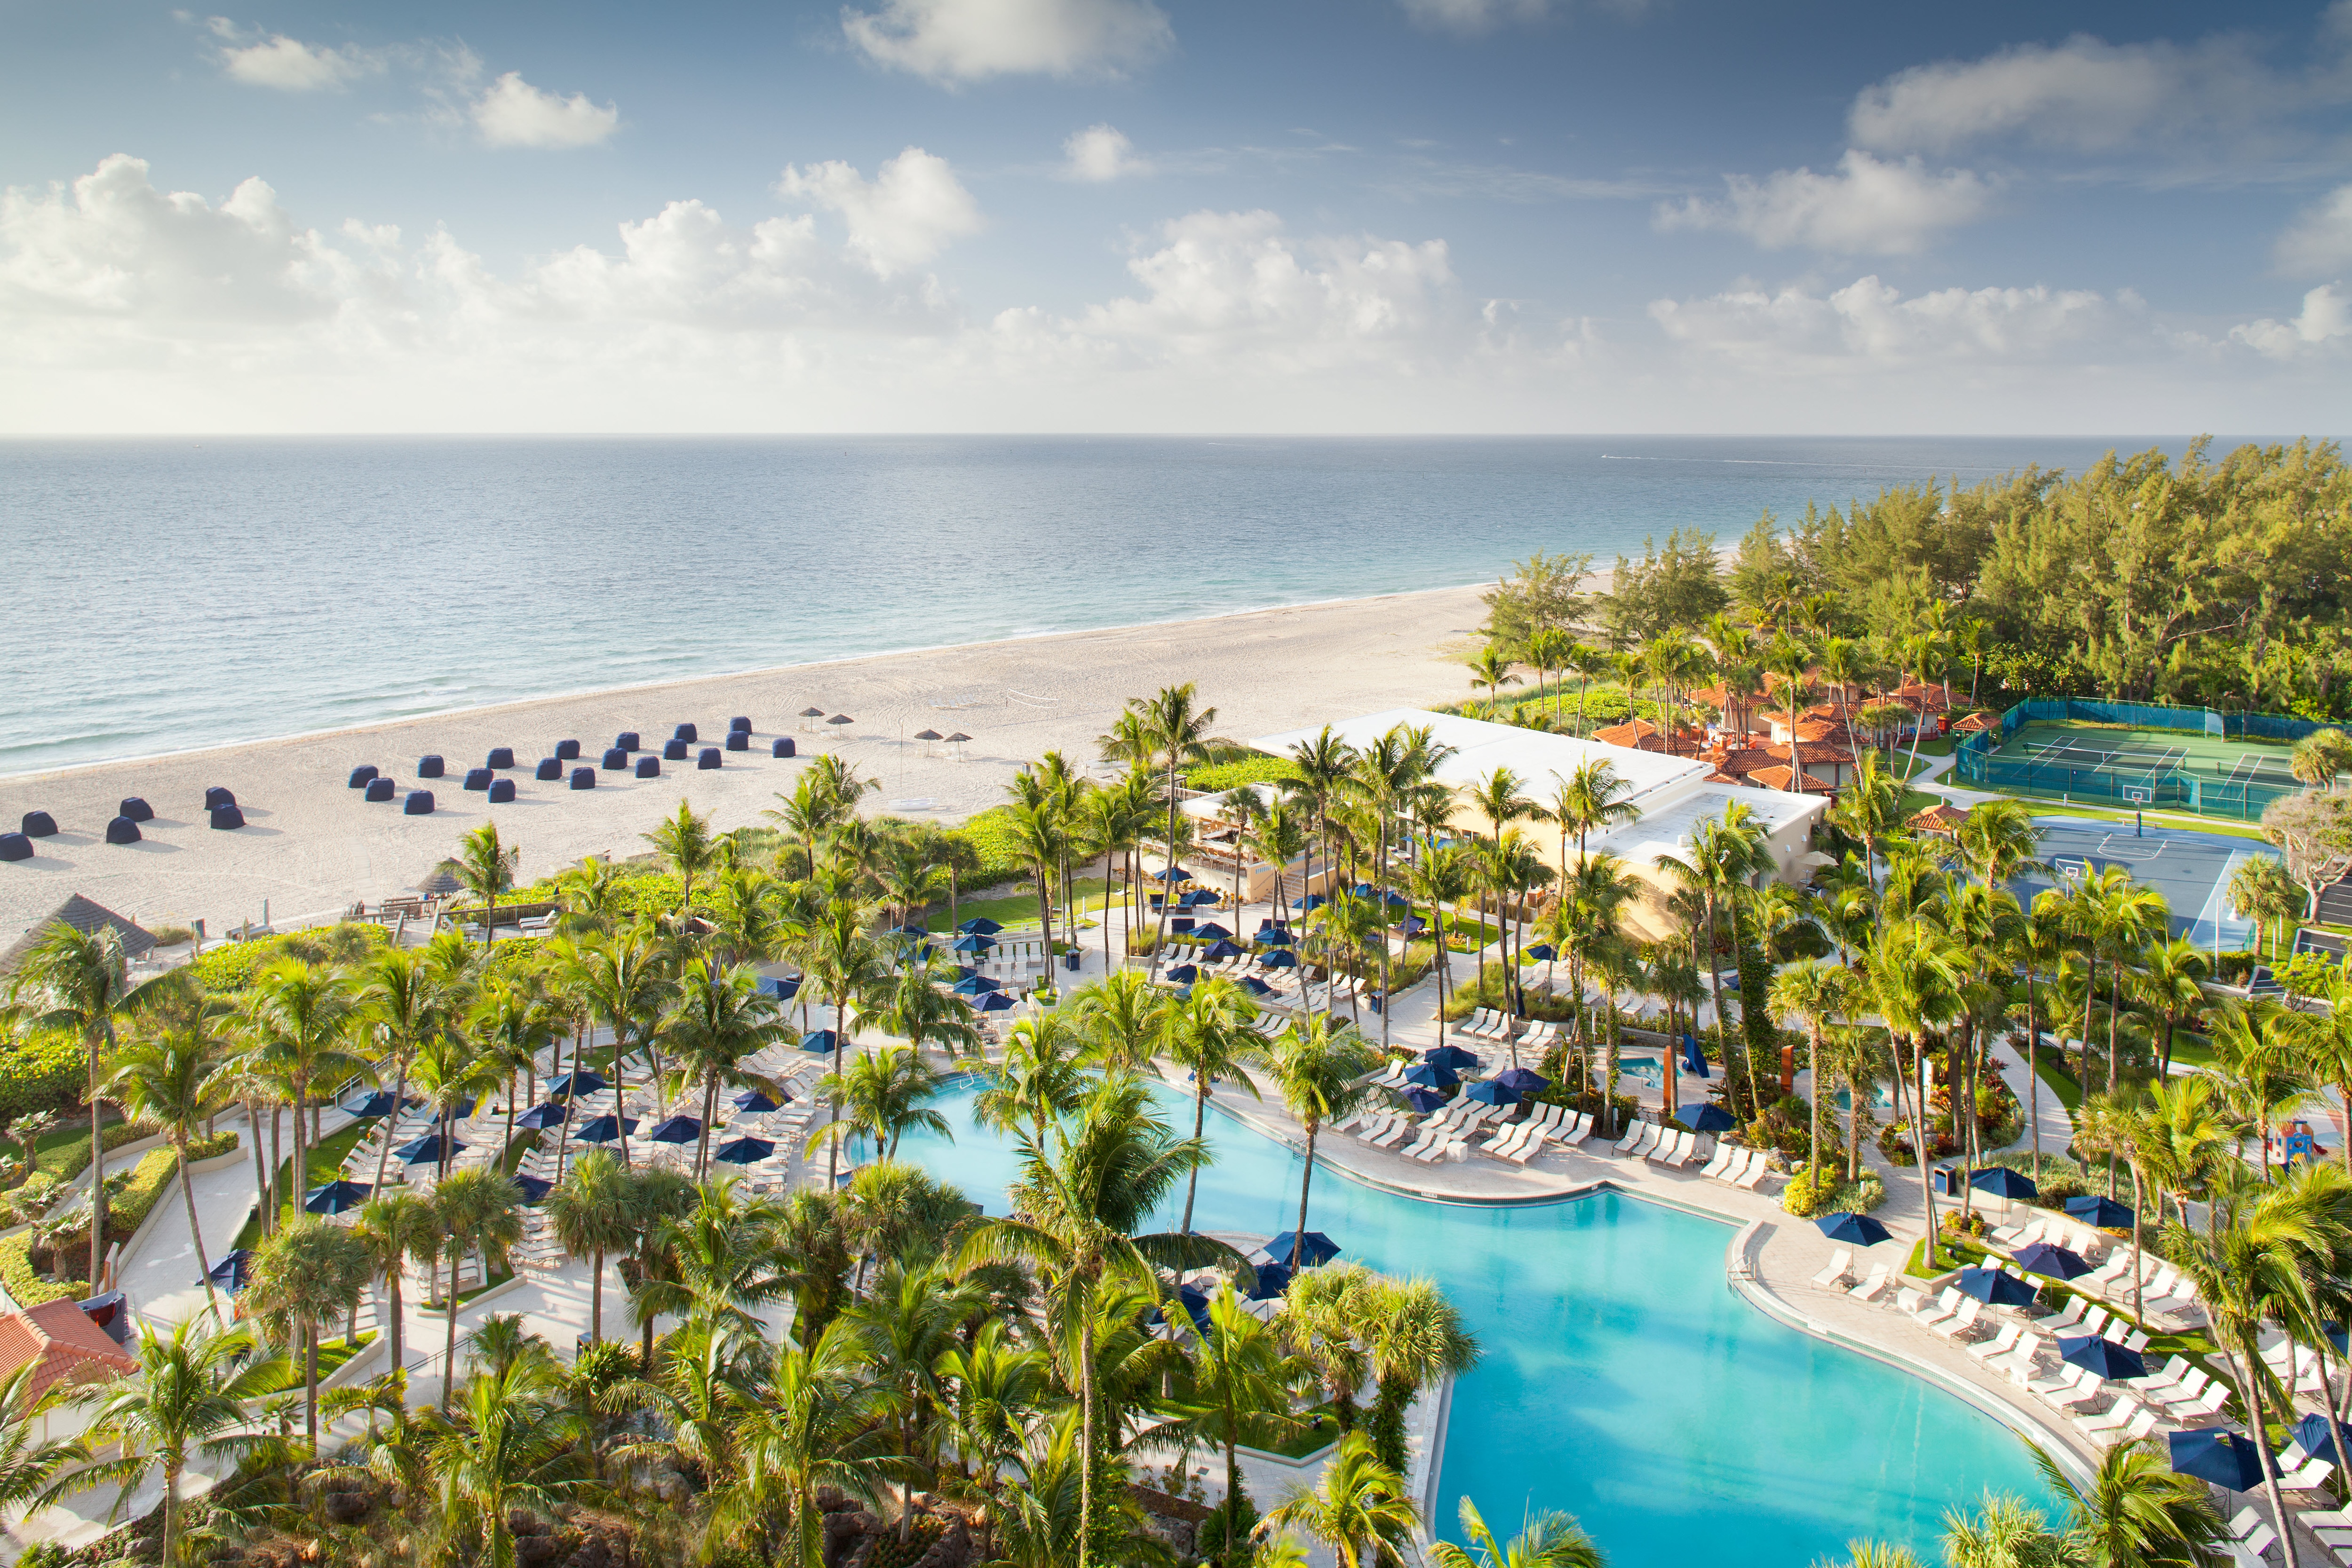 Top 10 Marriott Vacation Club Florida Locations to Visit in 2023